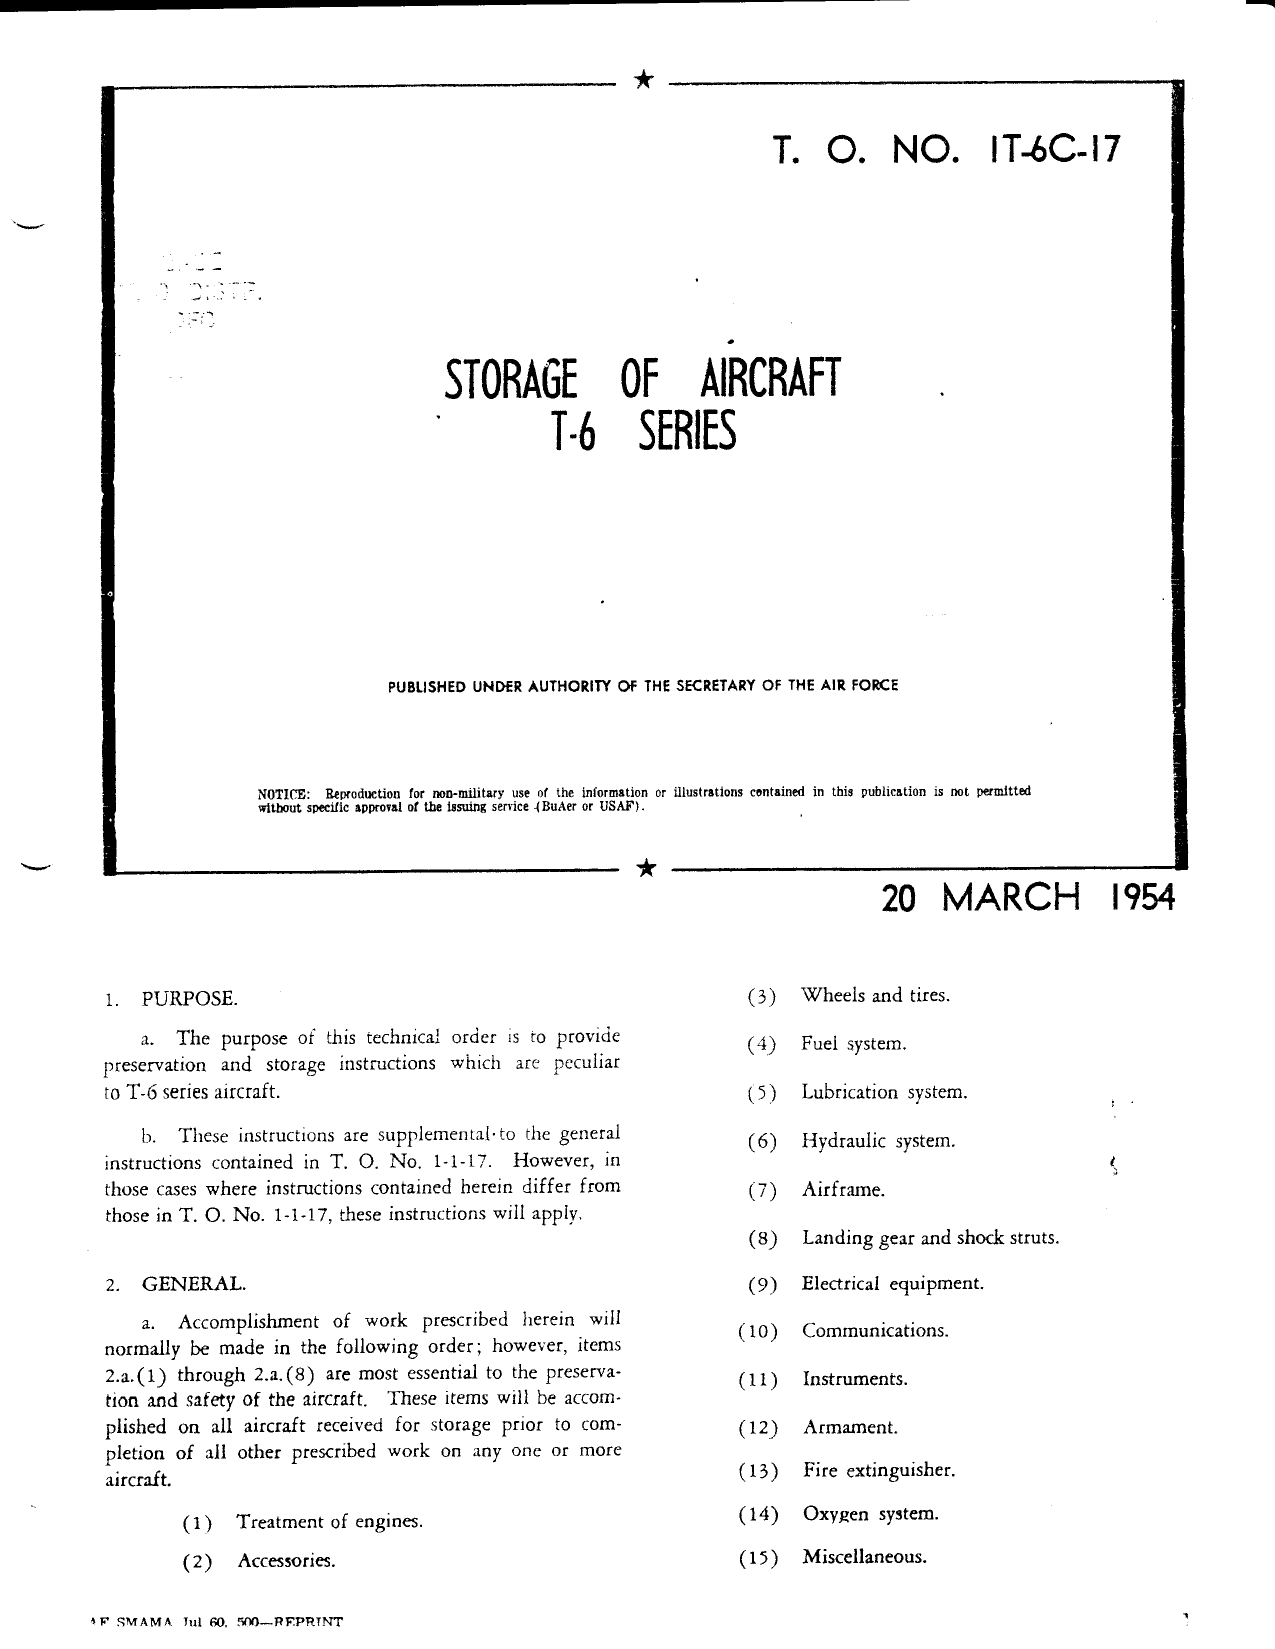 Sample page 1 from AirCorps Library document: Storage of Aircraft, T-6 Series